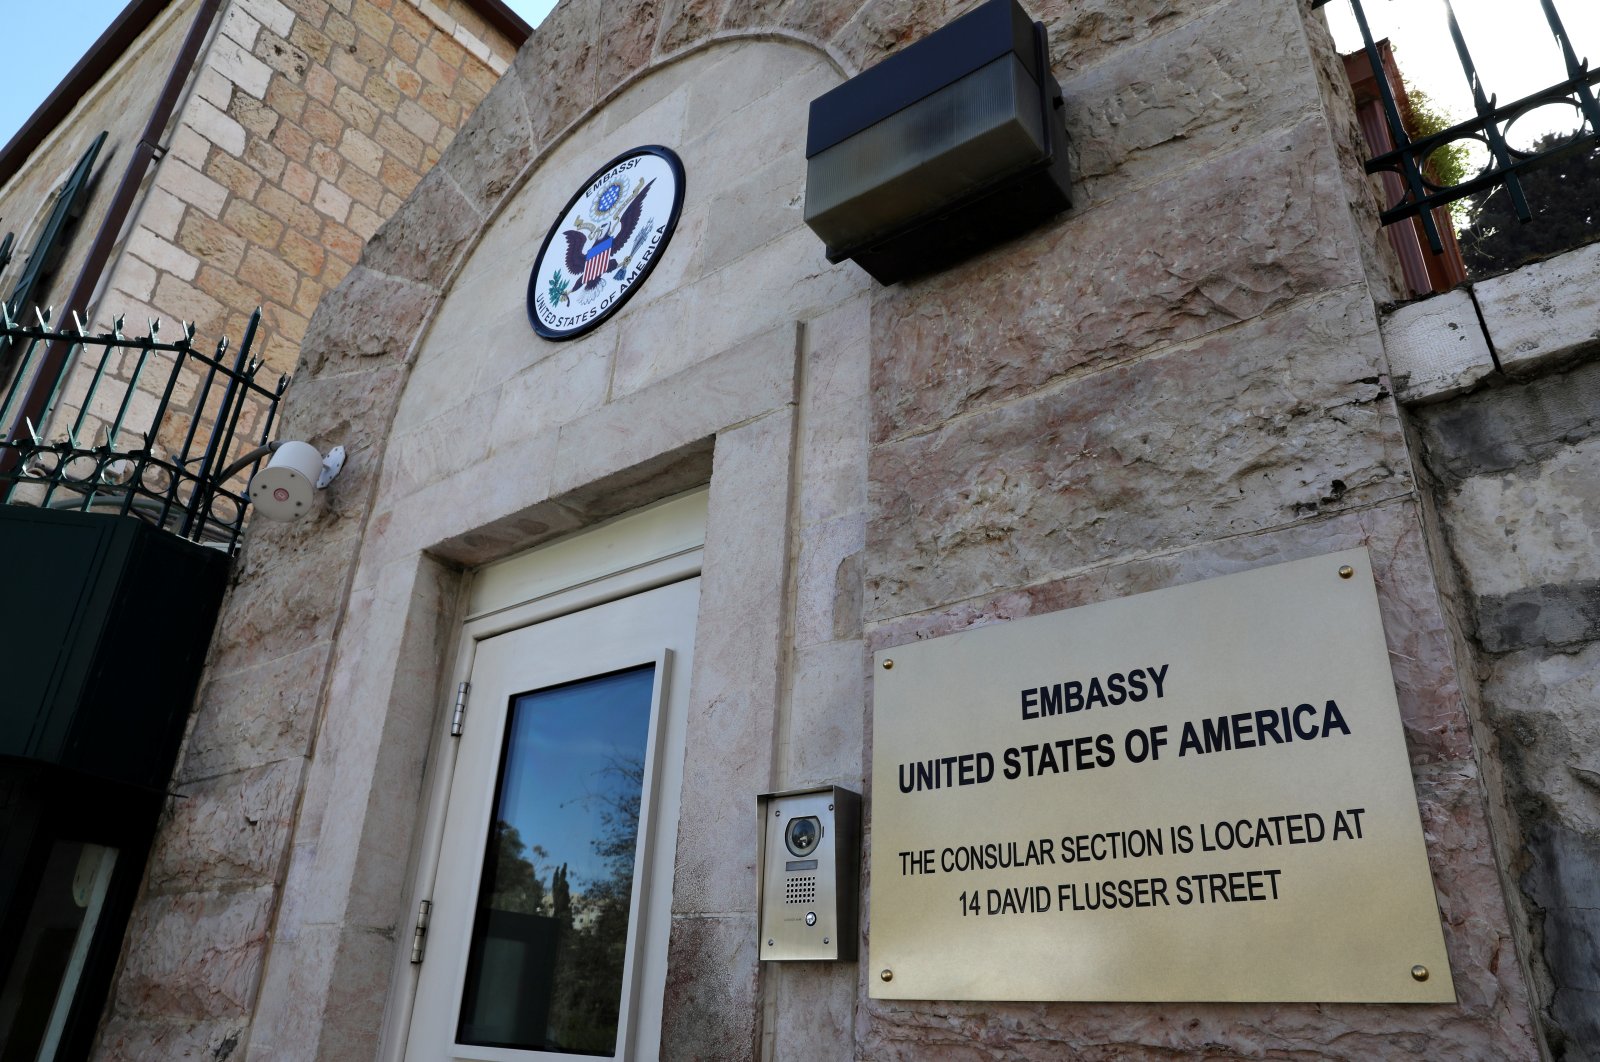 Plaques bearing the words "Embassy United States of America" are seen on a wall at the premises of the former U.S. Consulate in East Jerusalem, occupied Palestine, March 12, 2019. (Reuters Photo)